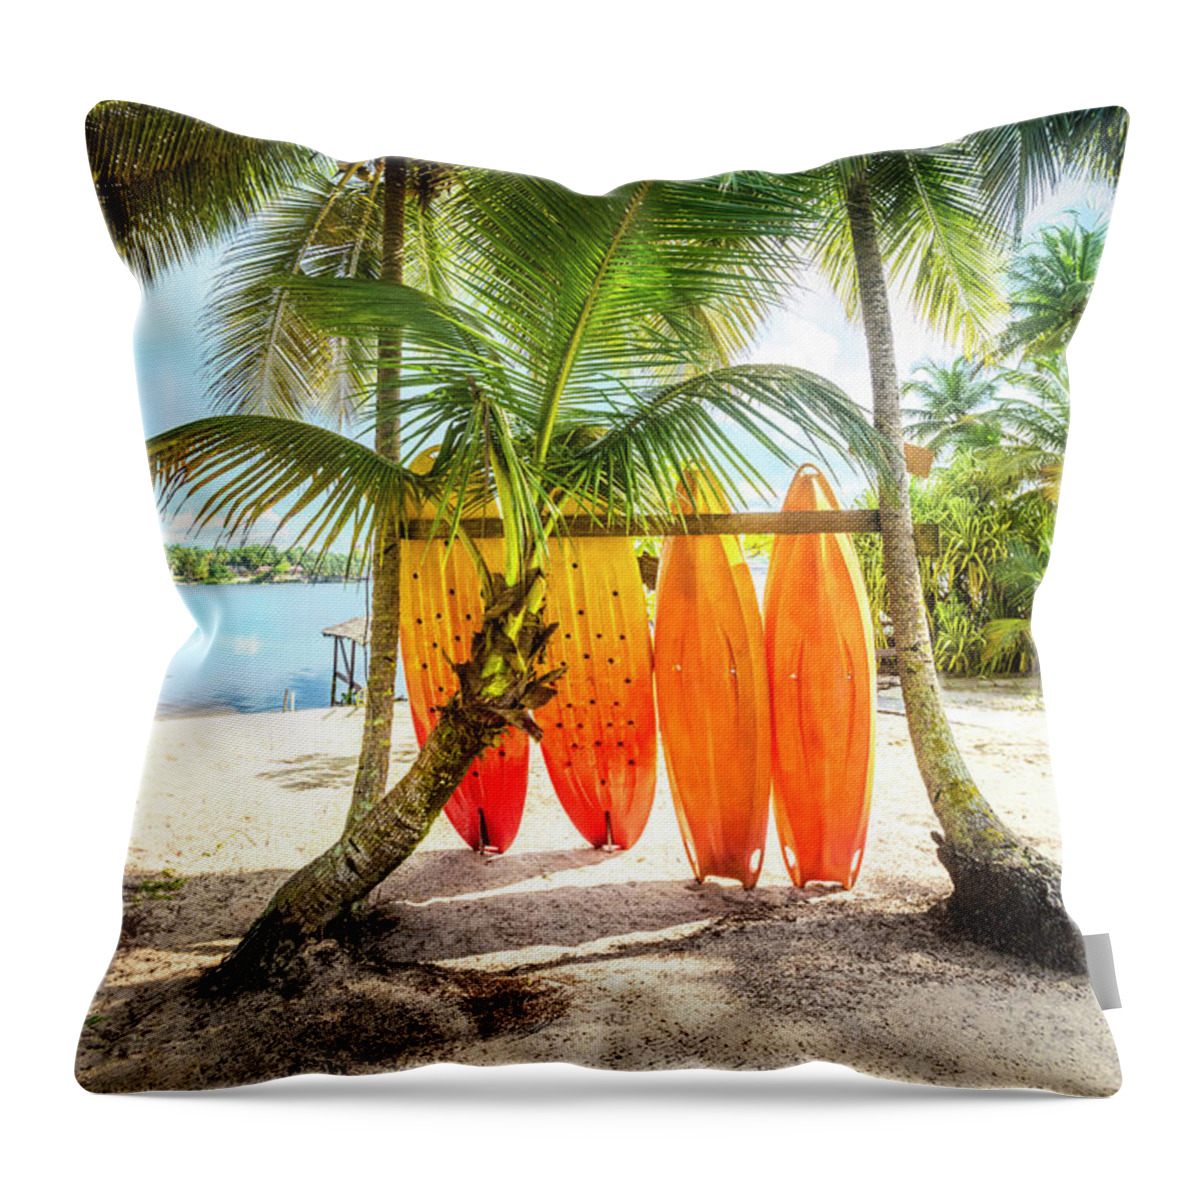 African Throw Pillow featuring the photograph Caribbean Island Mood by Debra and Dave Vanderlaan